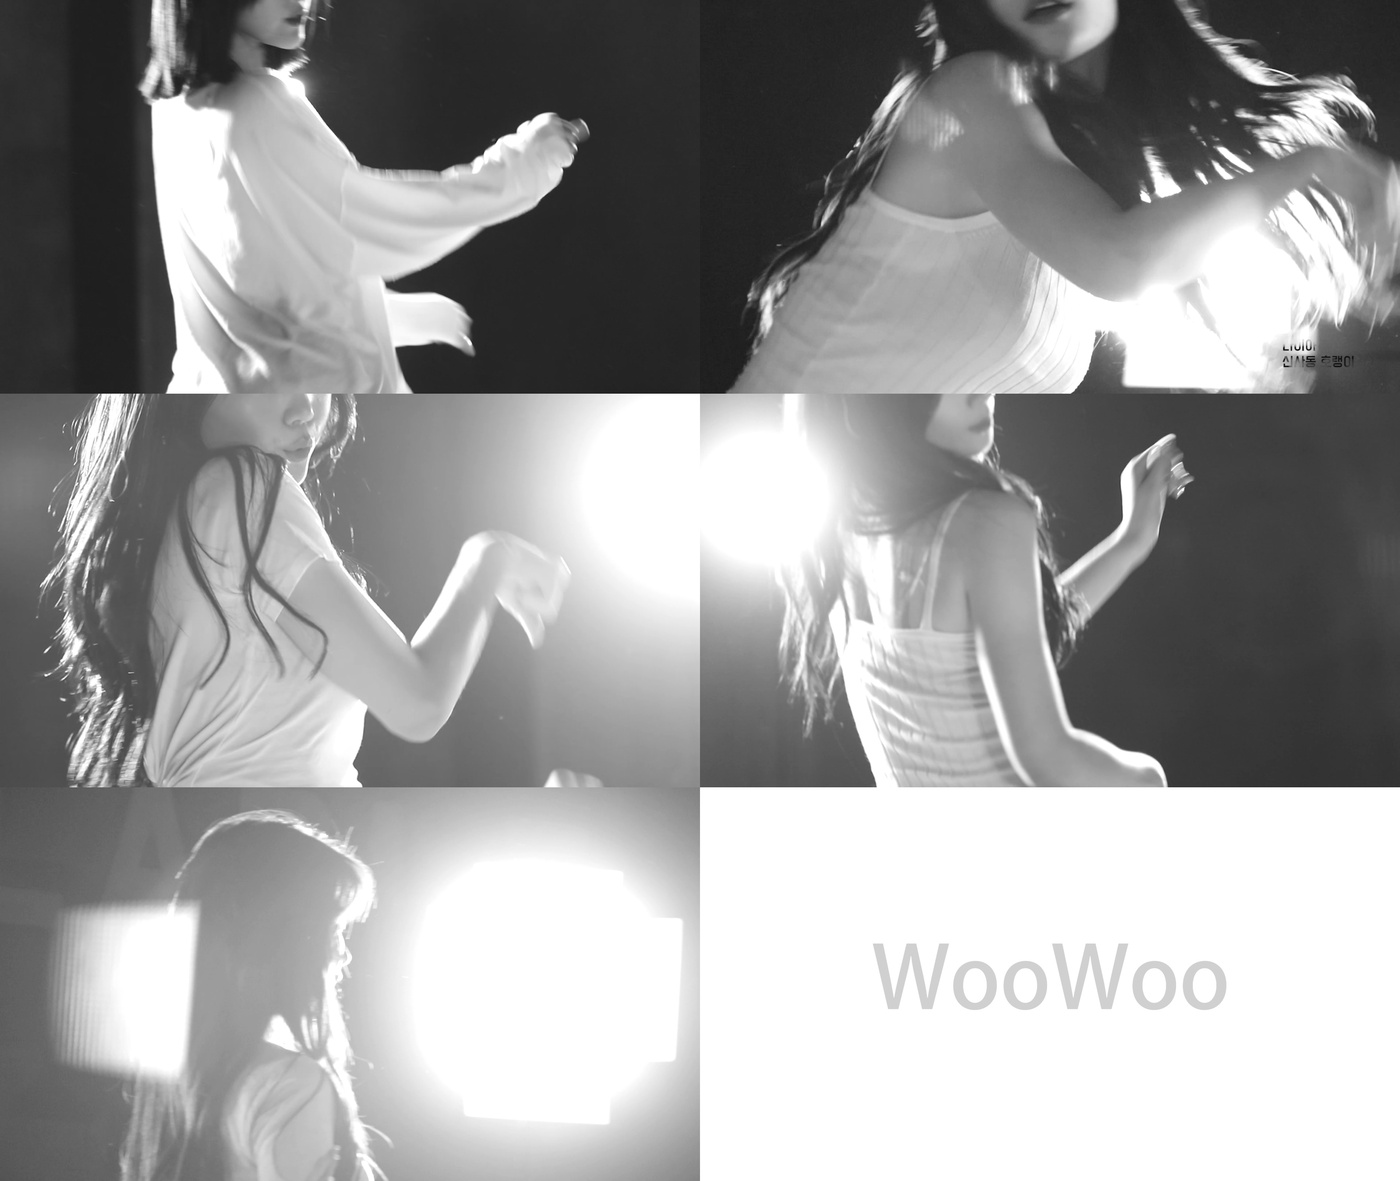 DIA, which is about to make a comeback on the 9th, released the choreographer of the title song Woo Woo for about 10 seconds.Melody, which flows with the members in the video, is highly anticipated because of its high additedness.DIA is about to make a comeback with the title song Woo Woo, produced by composer Shinsadong Tiger on the 9th (Thursday).